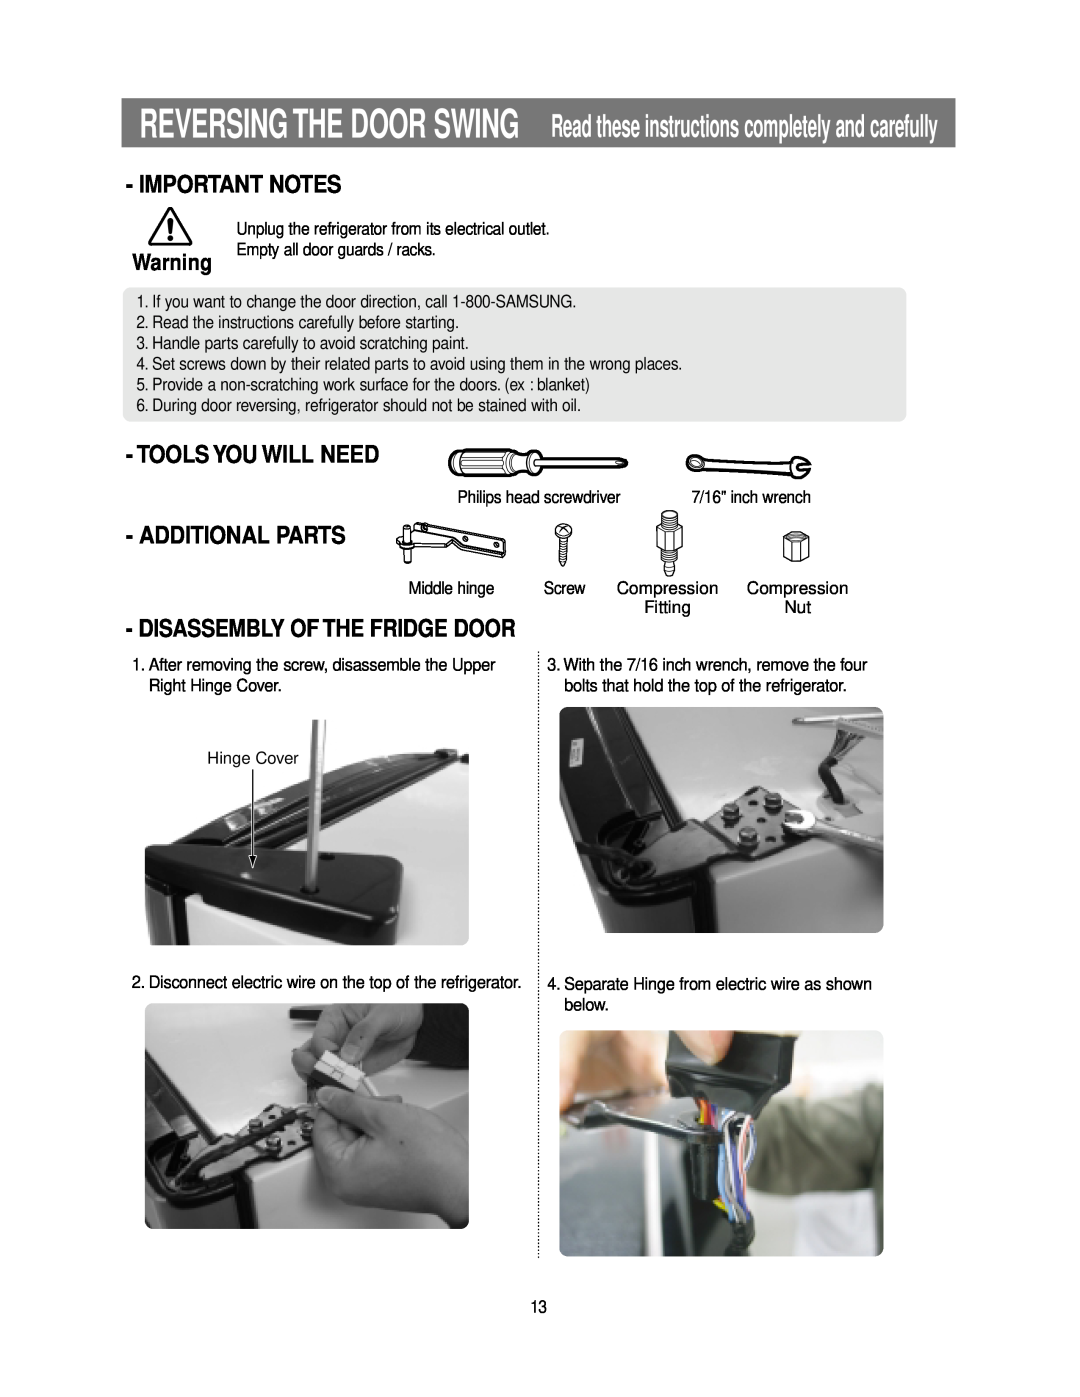 Samsung RB193KASB Important Notes, Tools You Will Need, Additional Parts, Disassembly Of The Fridge Door, Fitting 